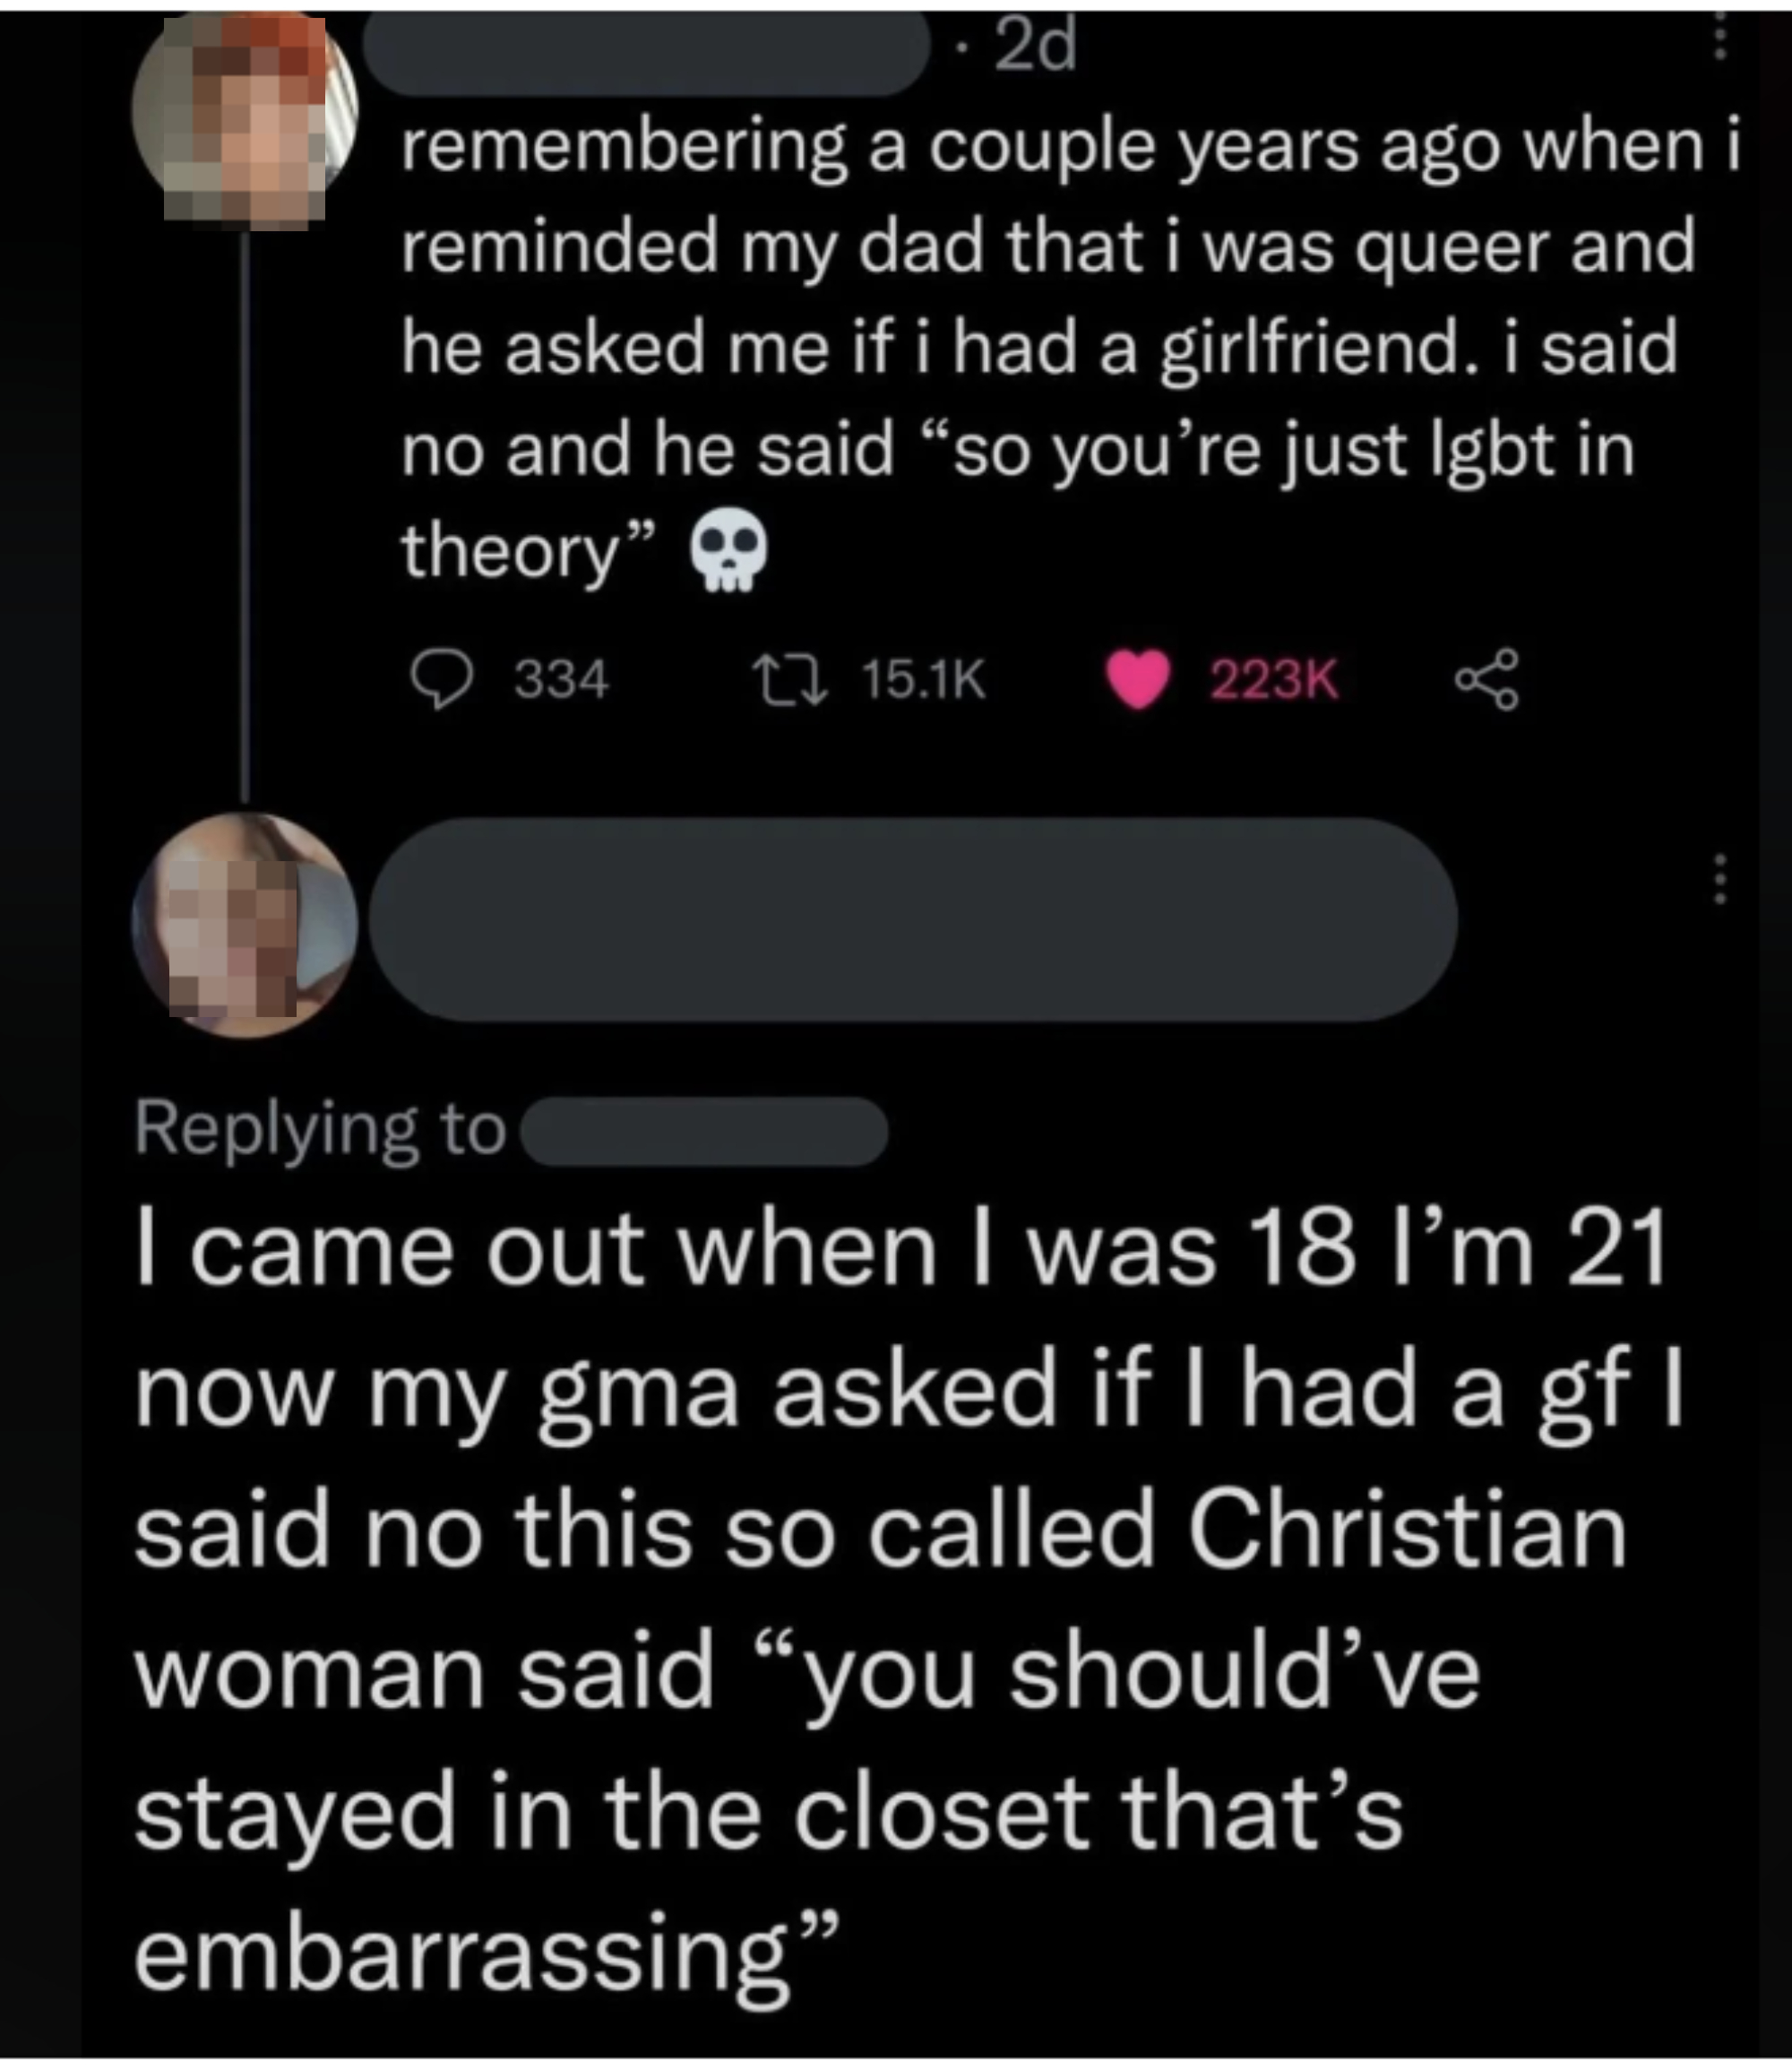 Screenshot of two social media posts discussing personal coming out experiences